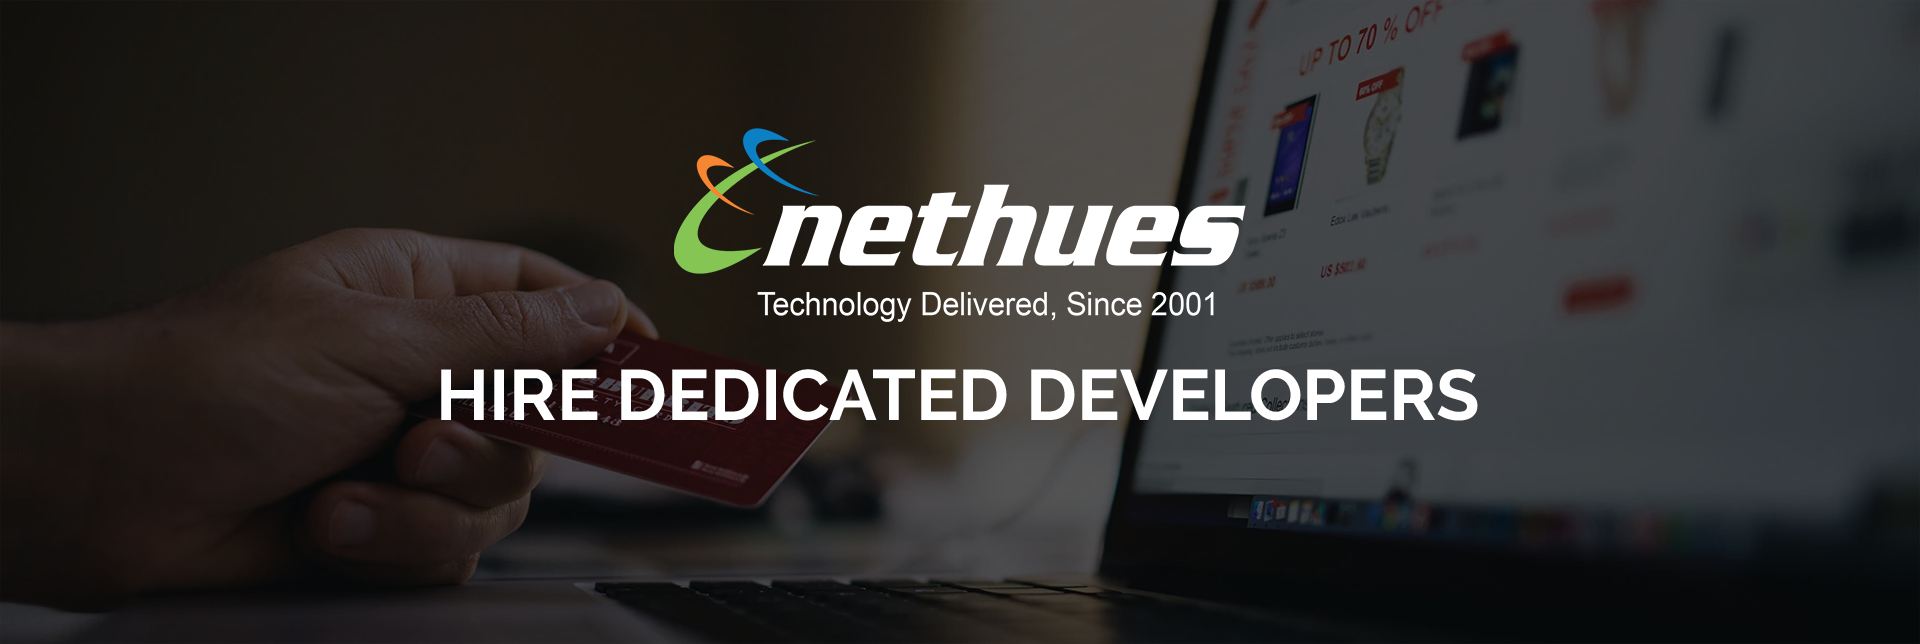 Hire Dedicated Developers | Expert Programmers for Hire in India - Nethues